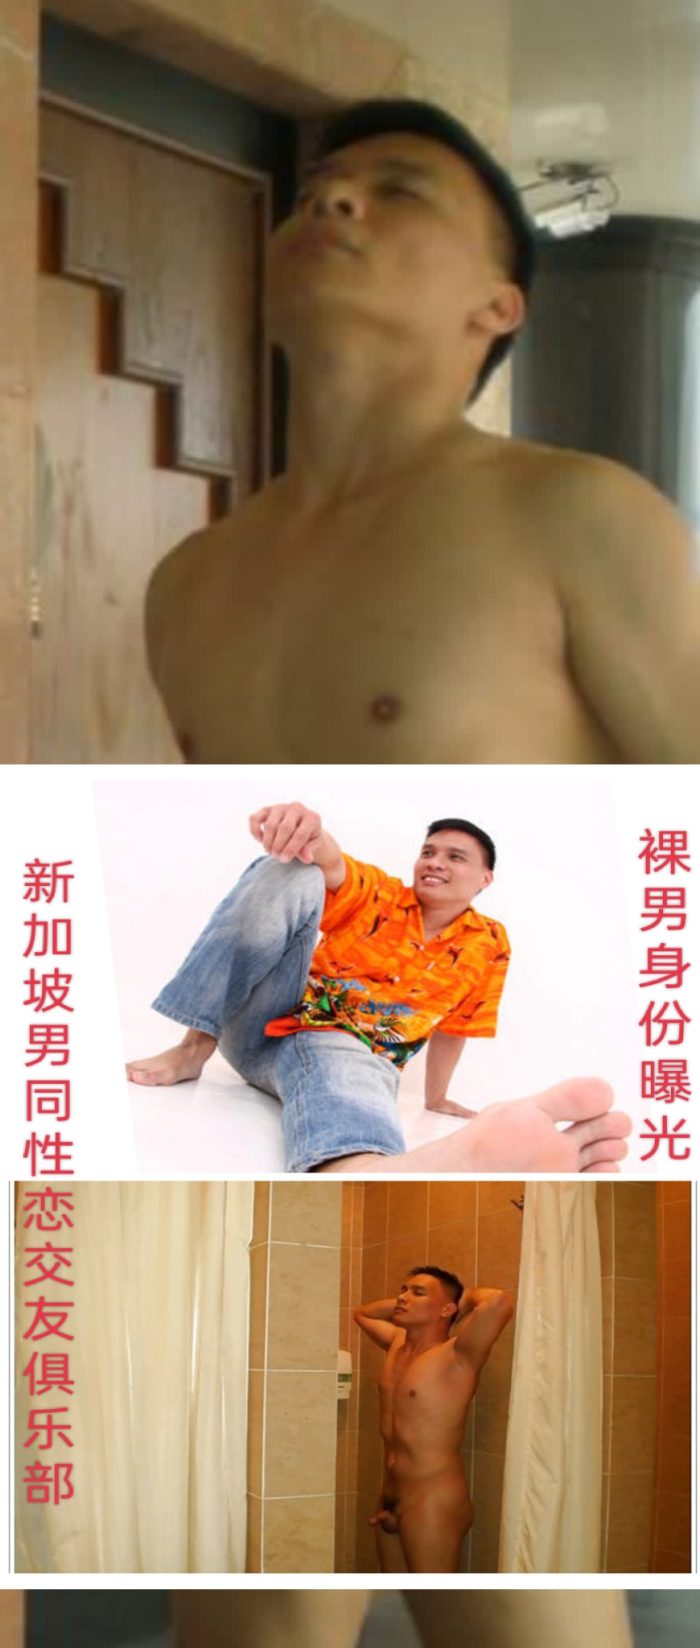 Asian Chinese Guy (Cute Little Winky Penis)